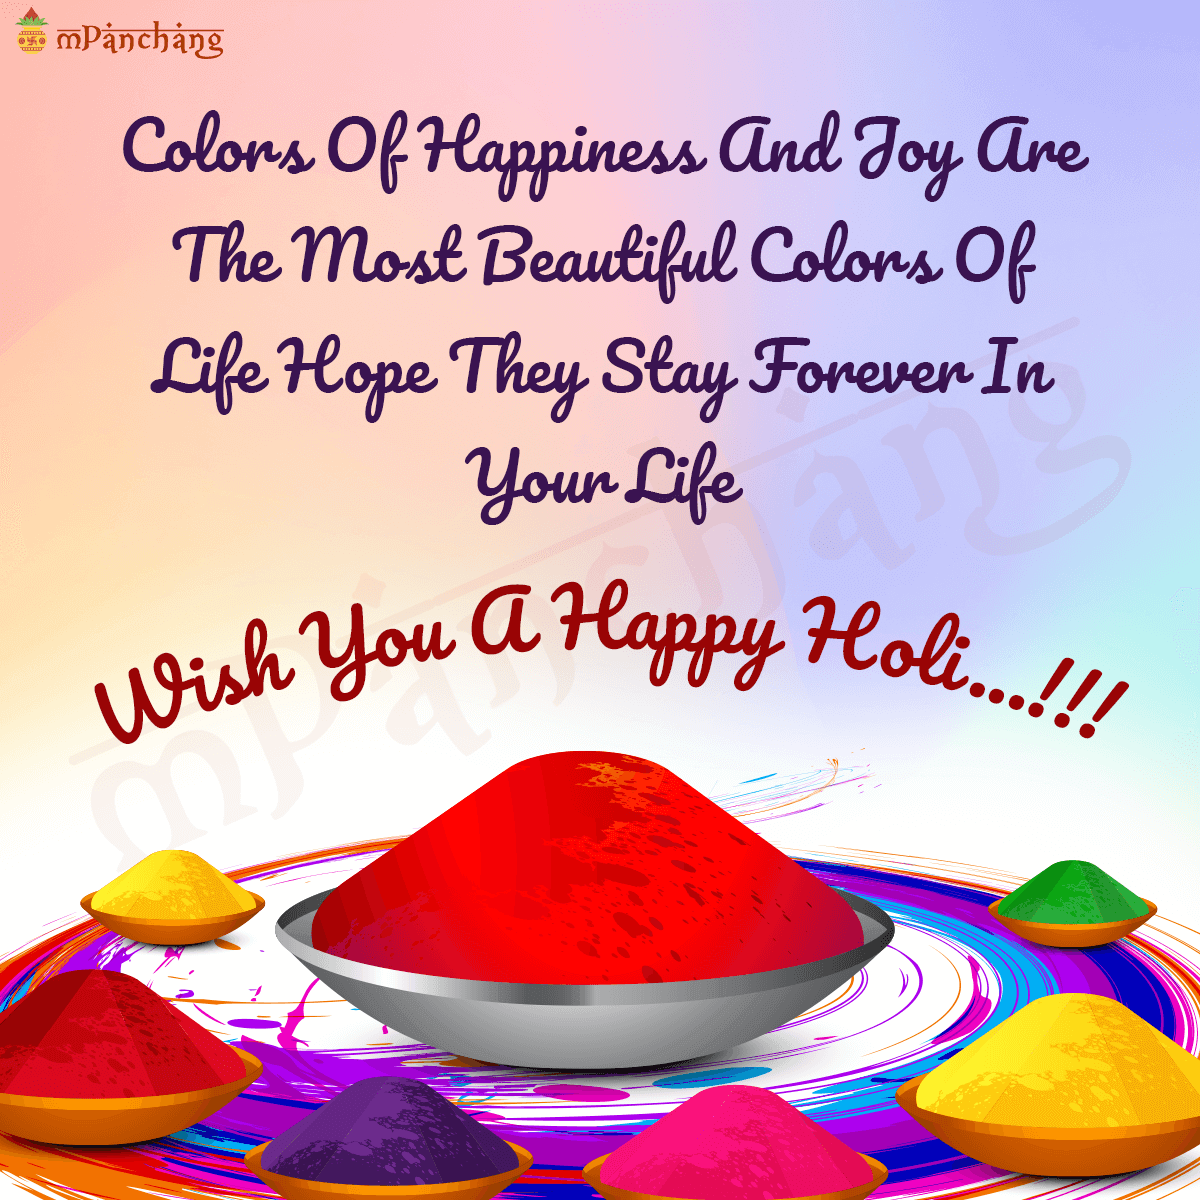 Happy Holi Wishes and Greetings